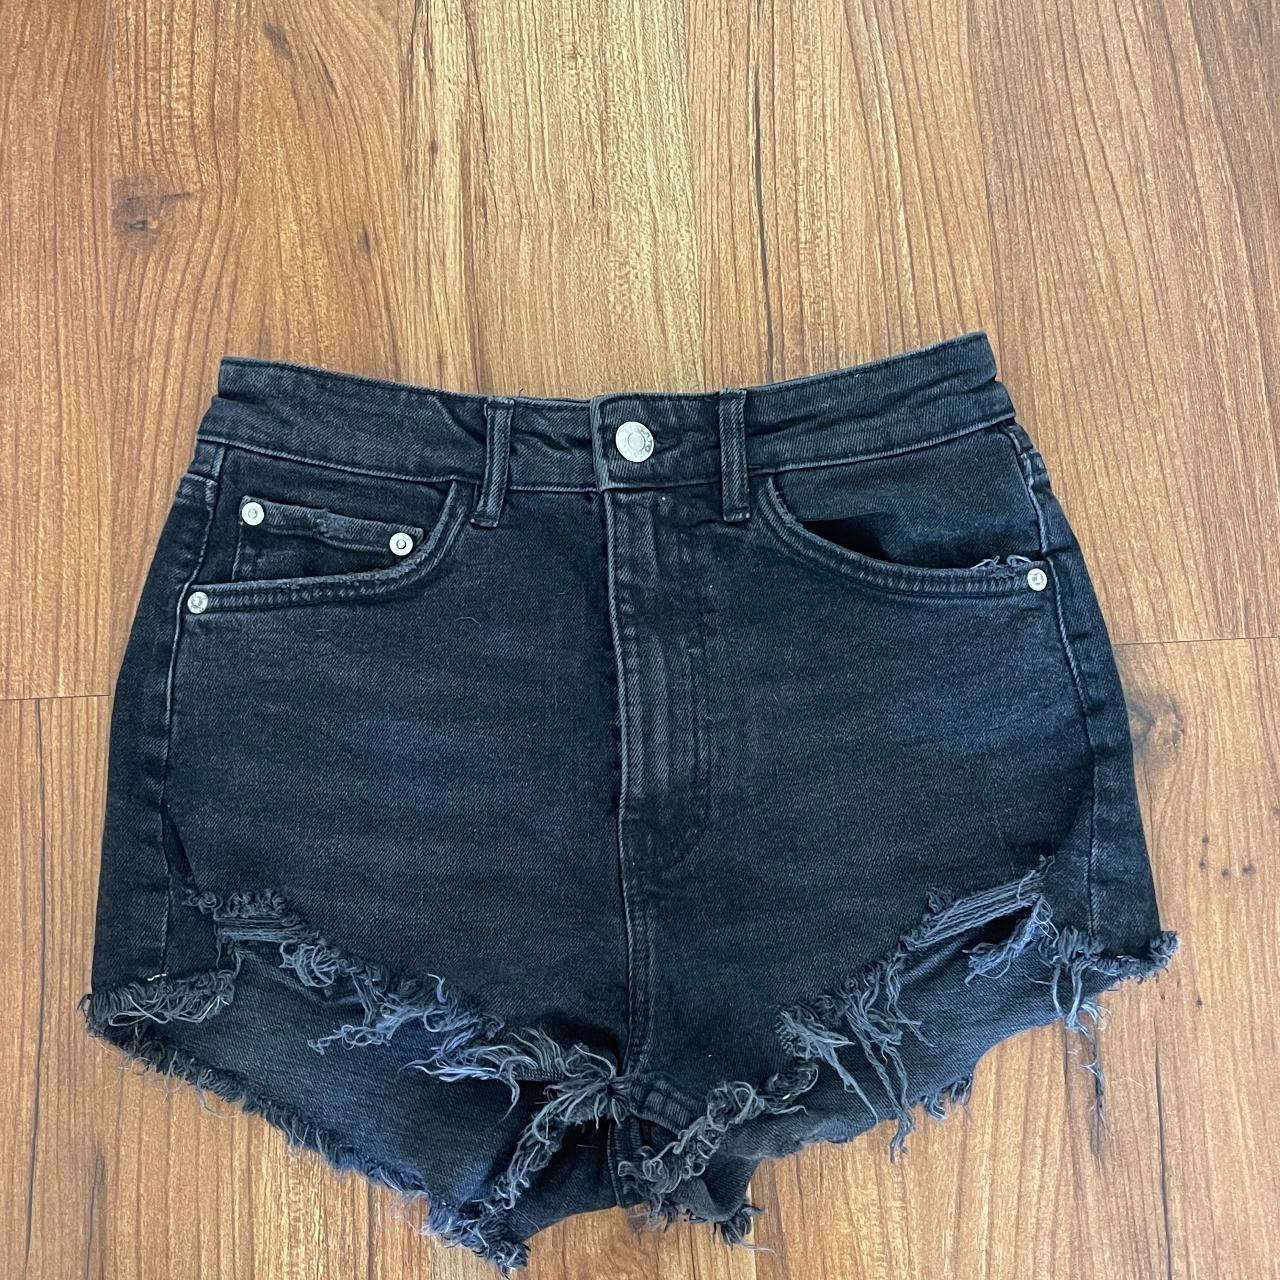 Black ripped jean shorts. High-rise. Size small, 4. - Depop